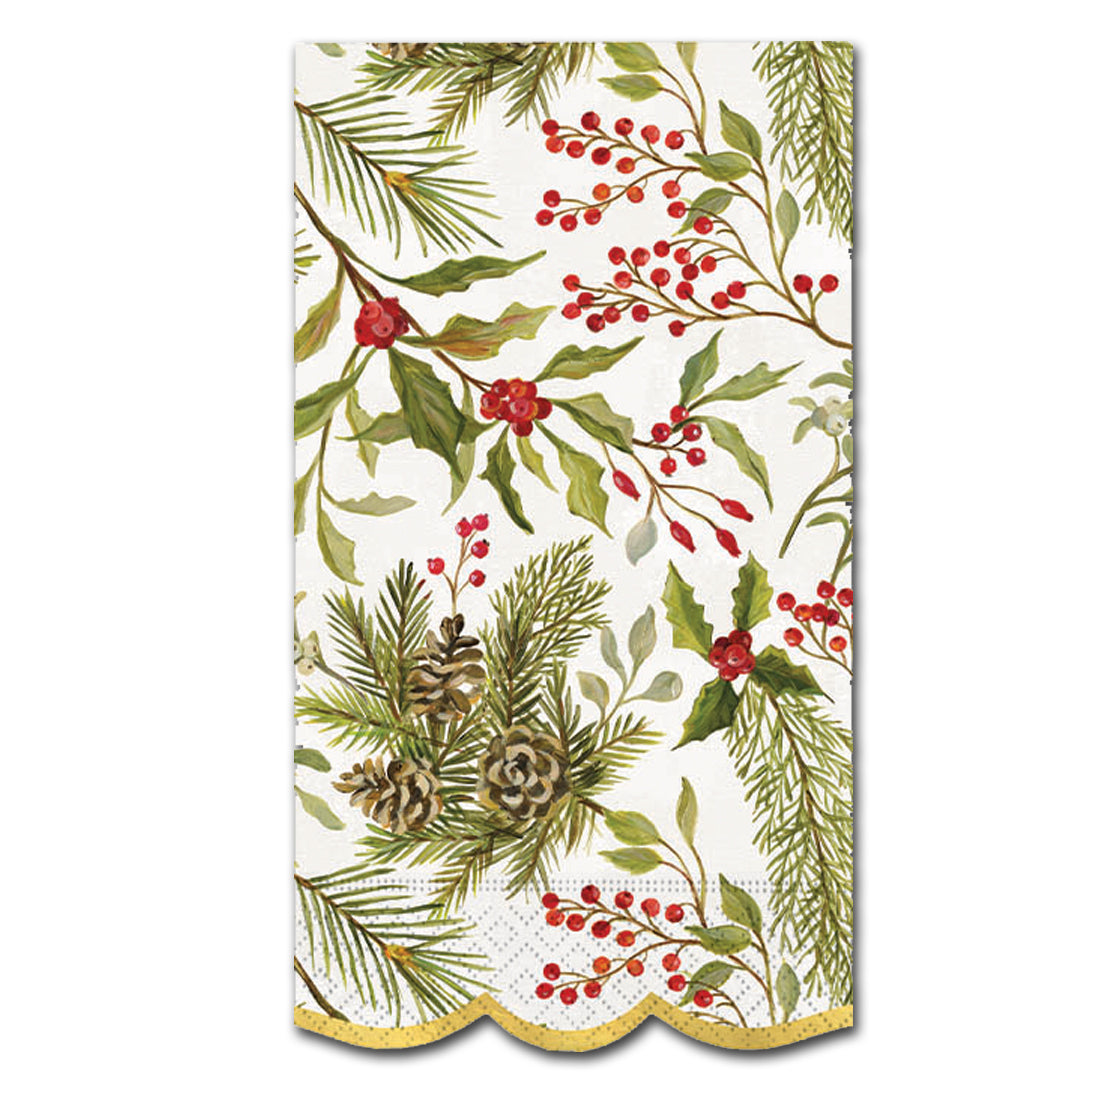 Merry Greenery Paper Guest Towels - Buffet Napkins